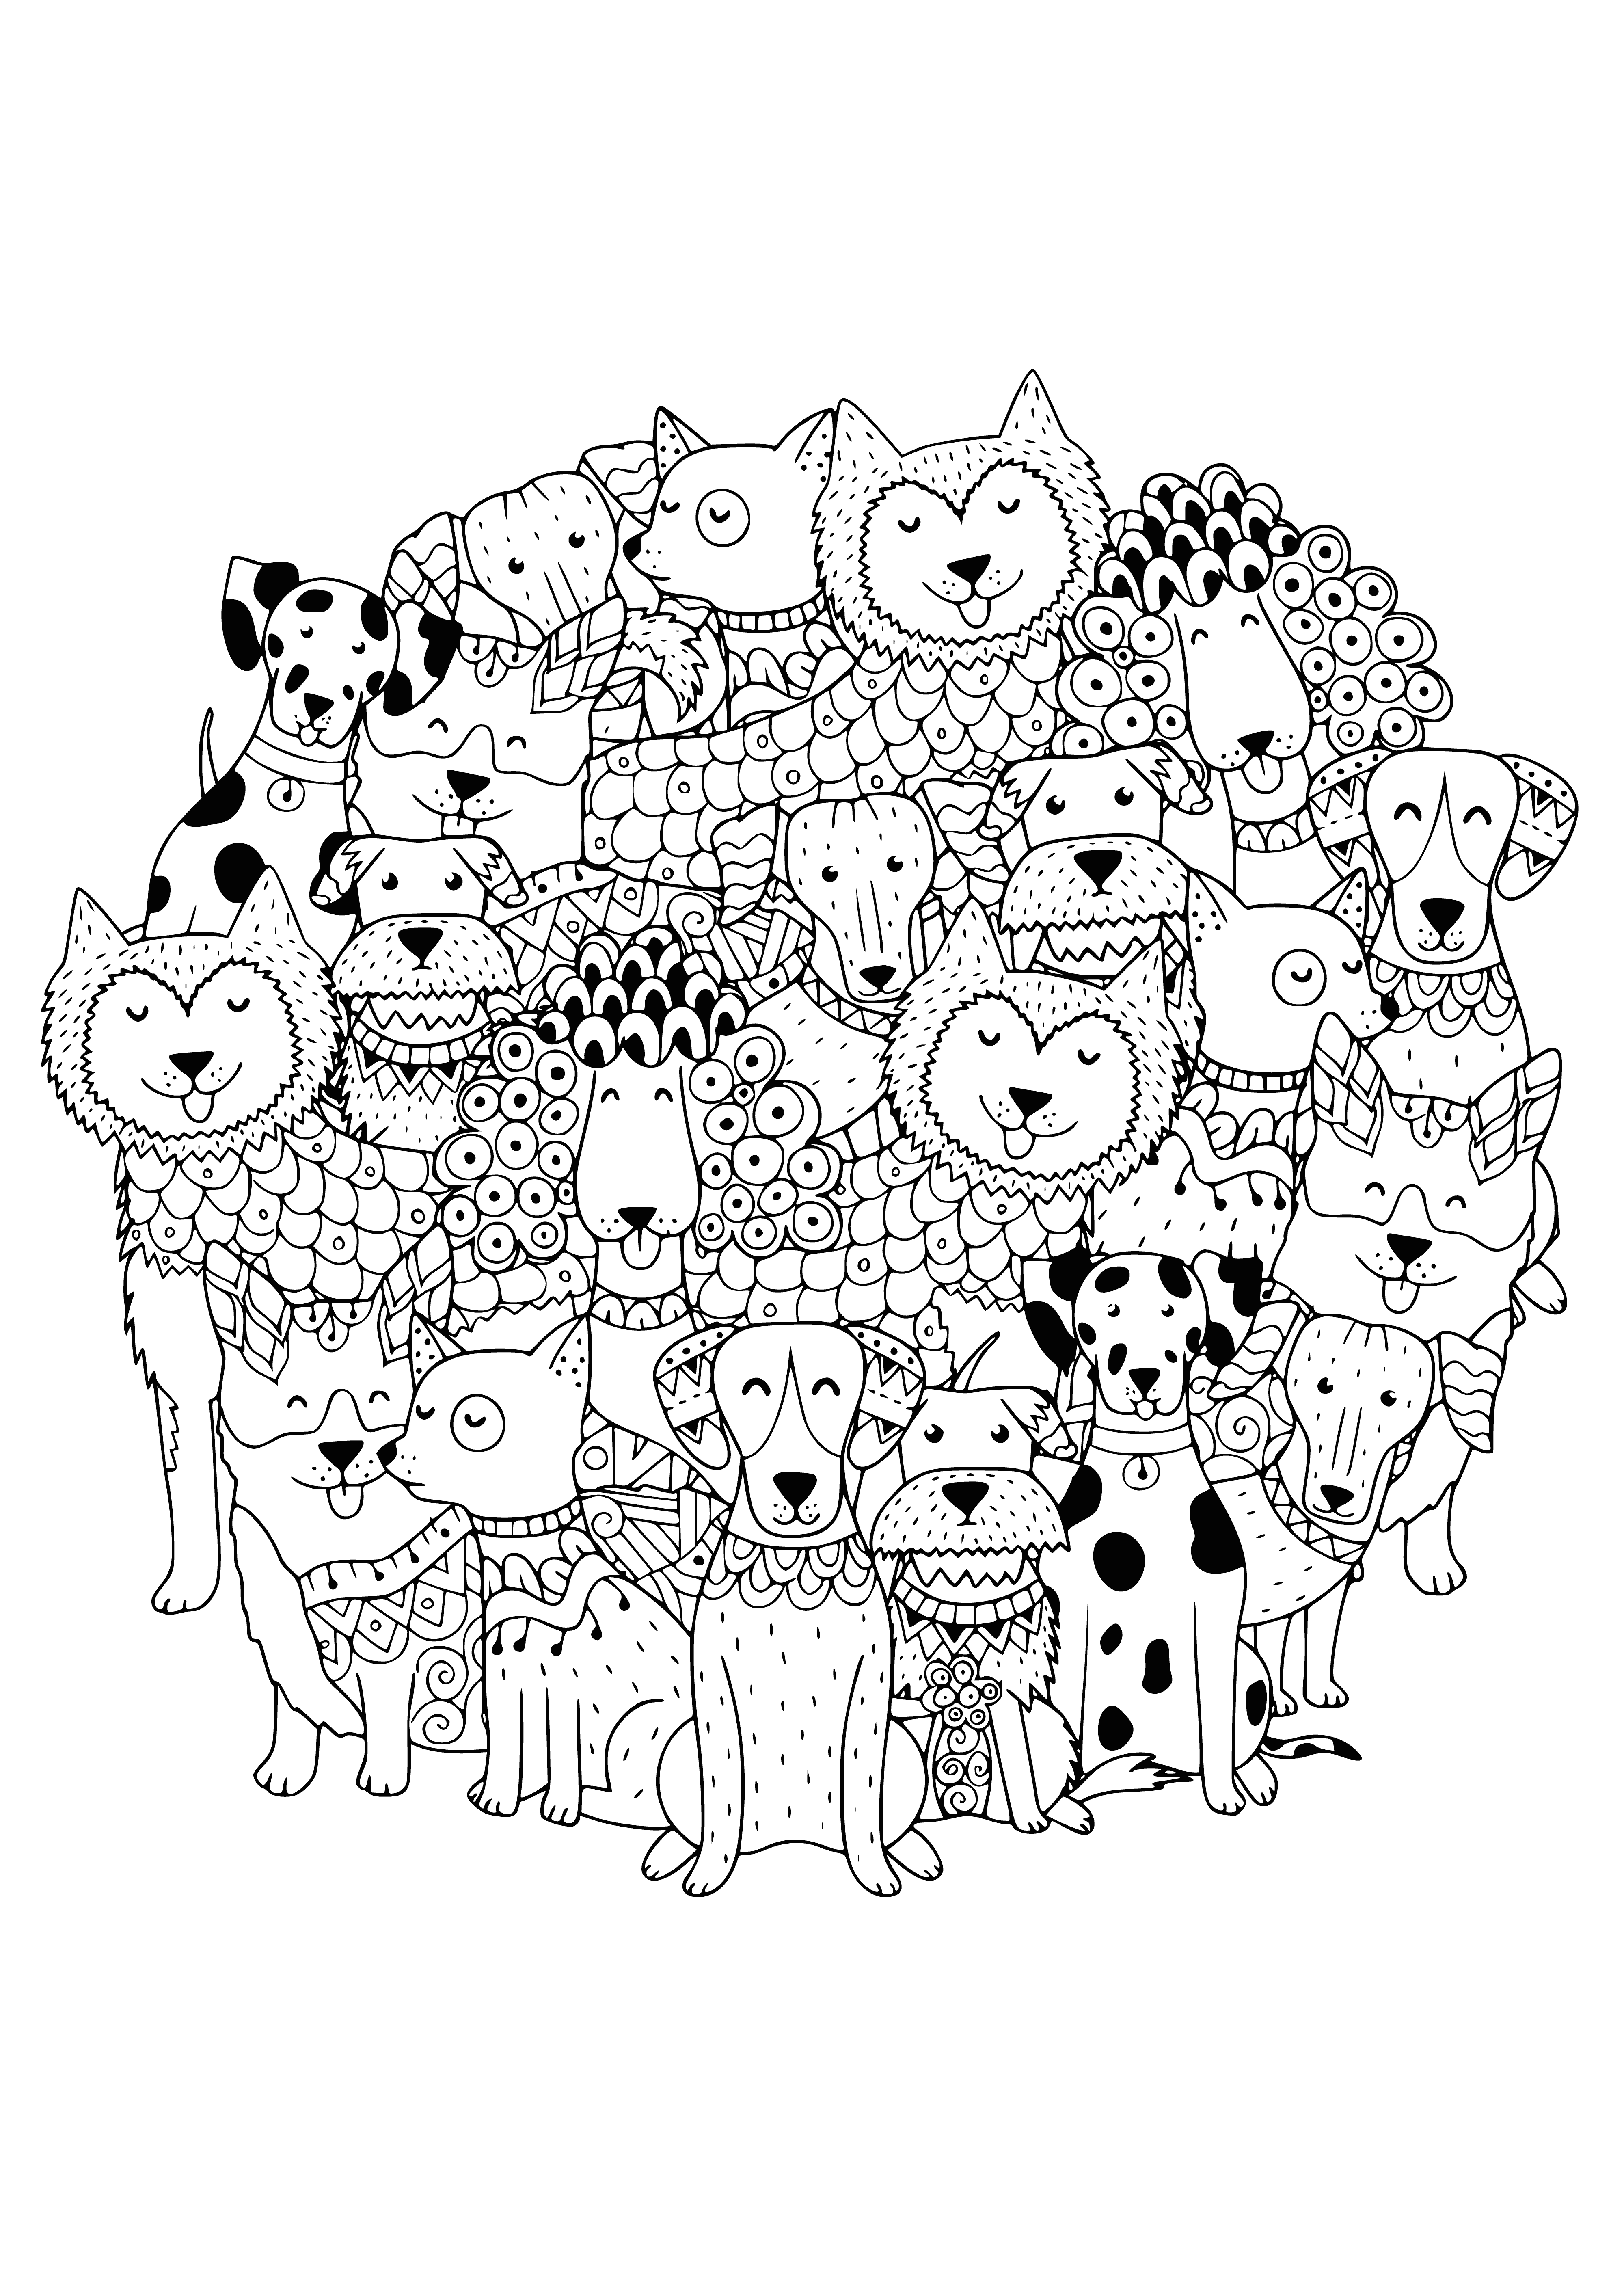 Funny dogs coloring page